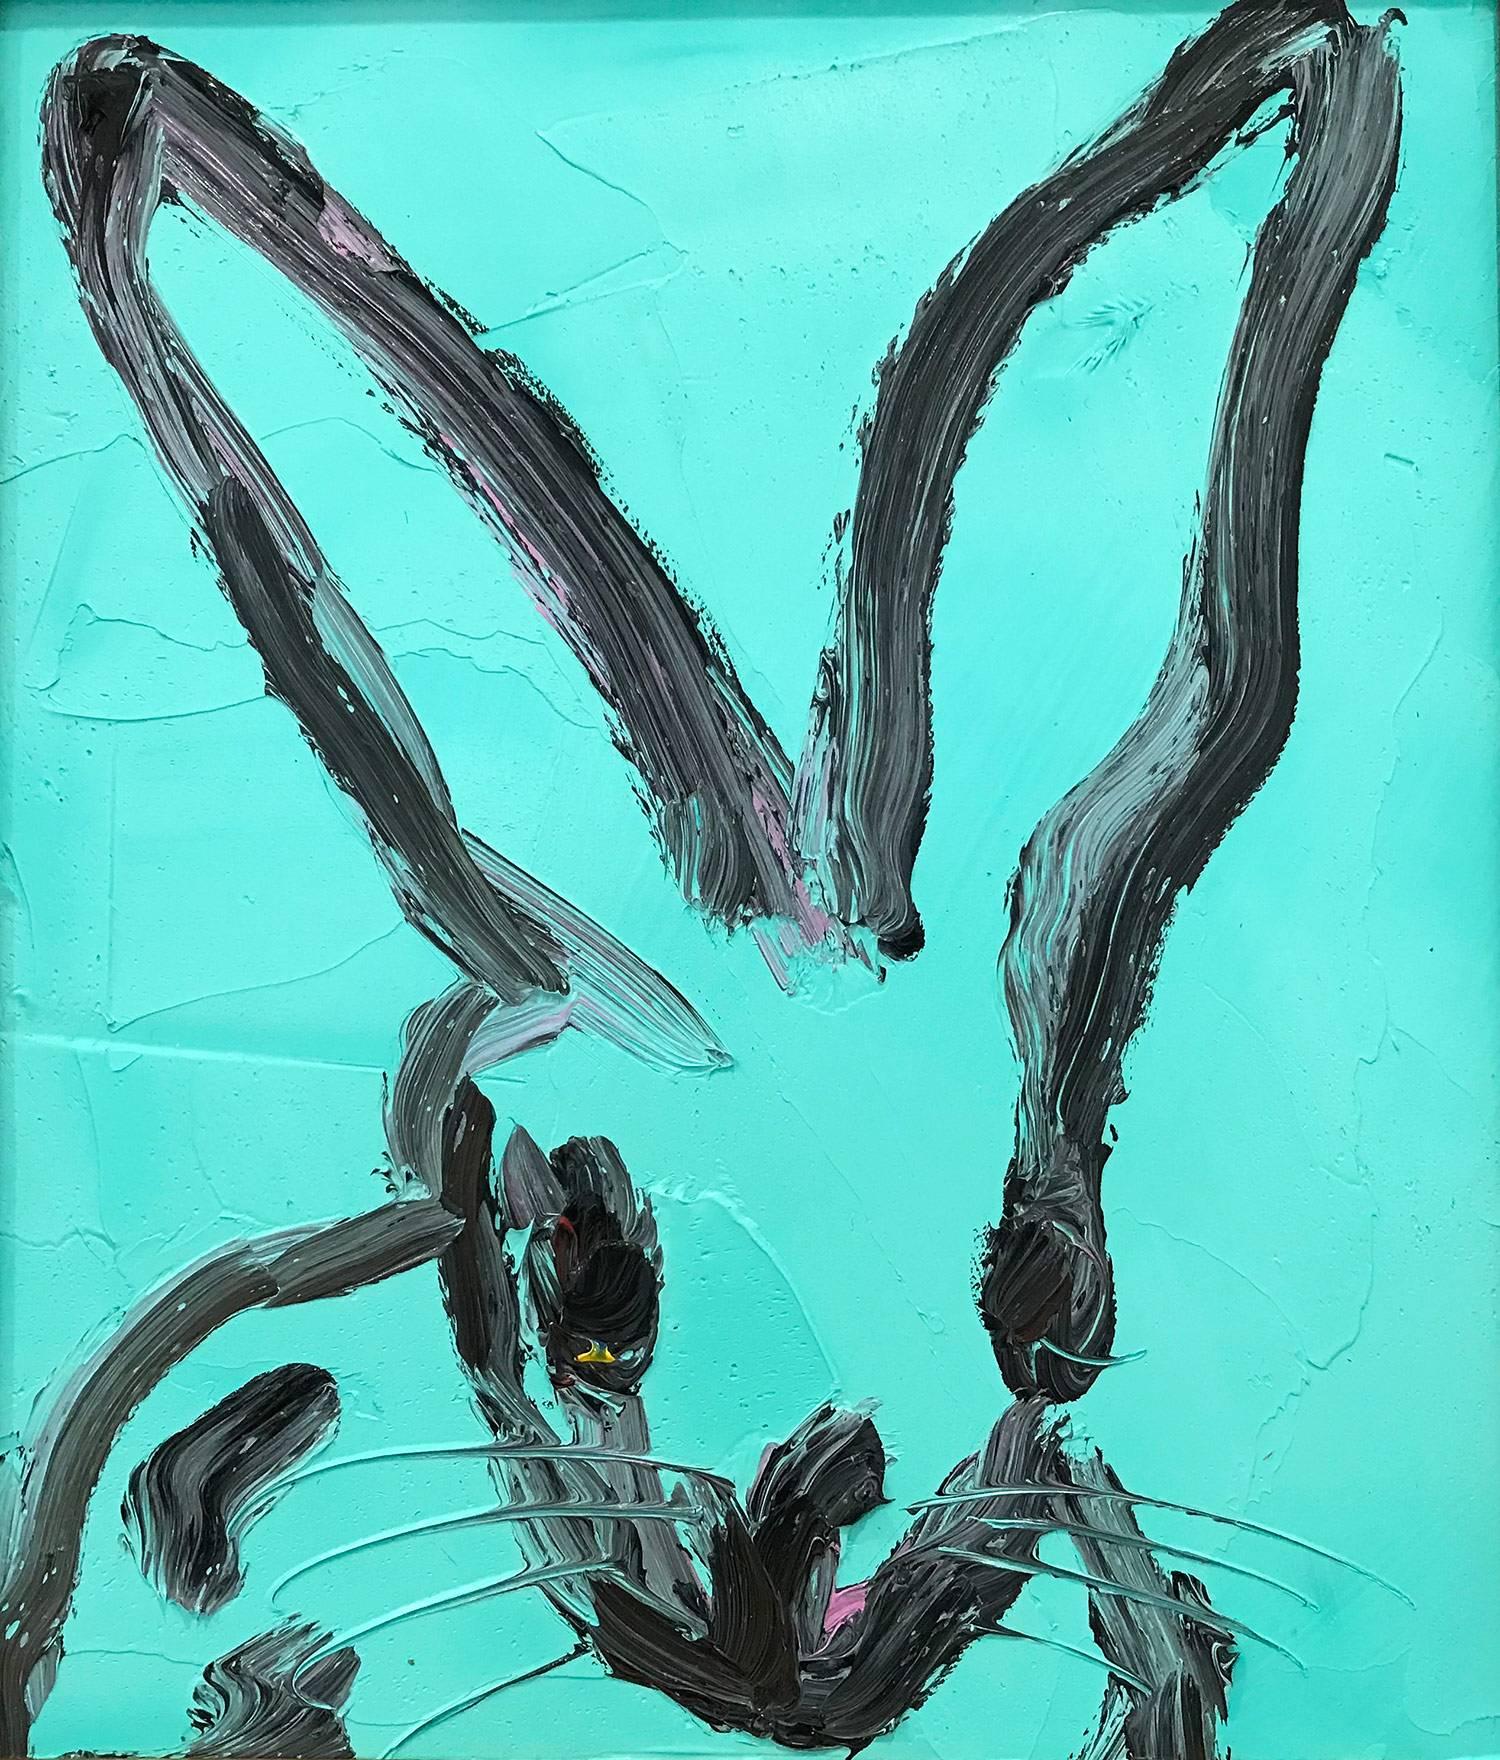 Untitled (Bunny on Turquoise) - Painting by Hunt Slonem